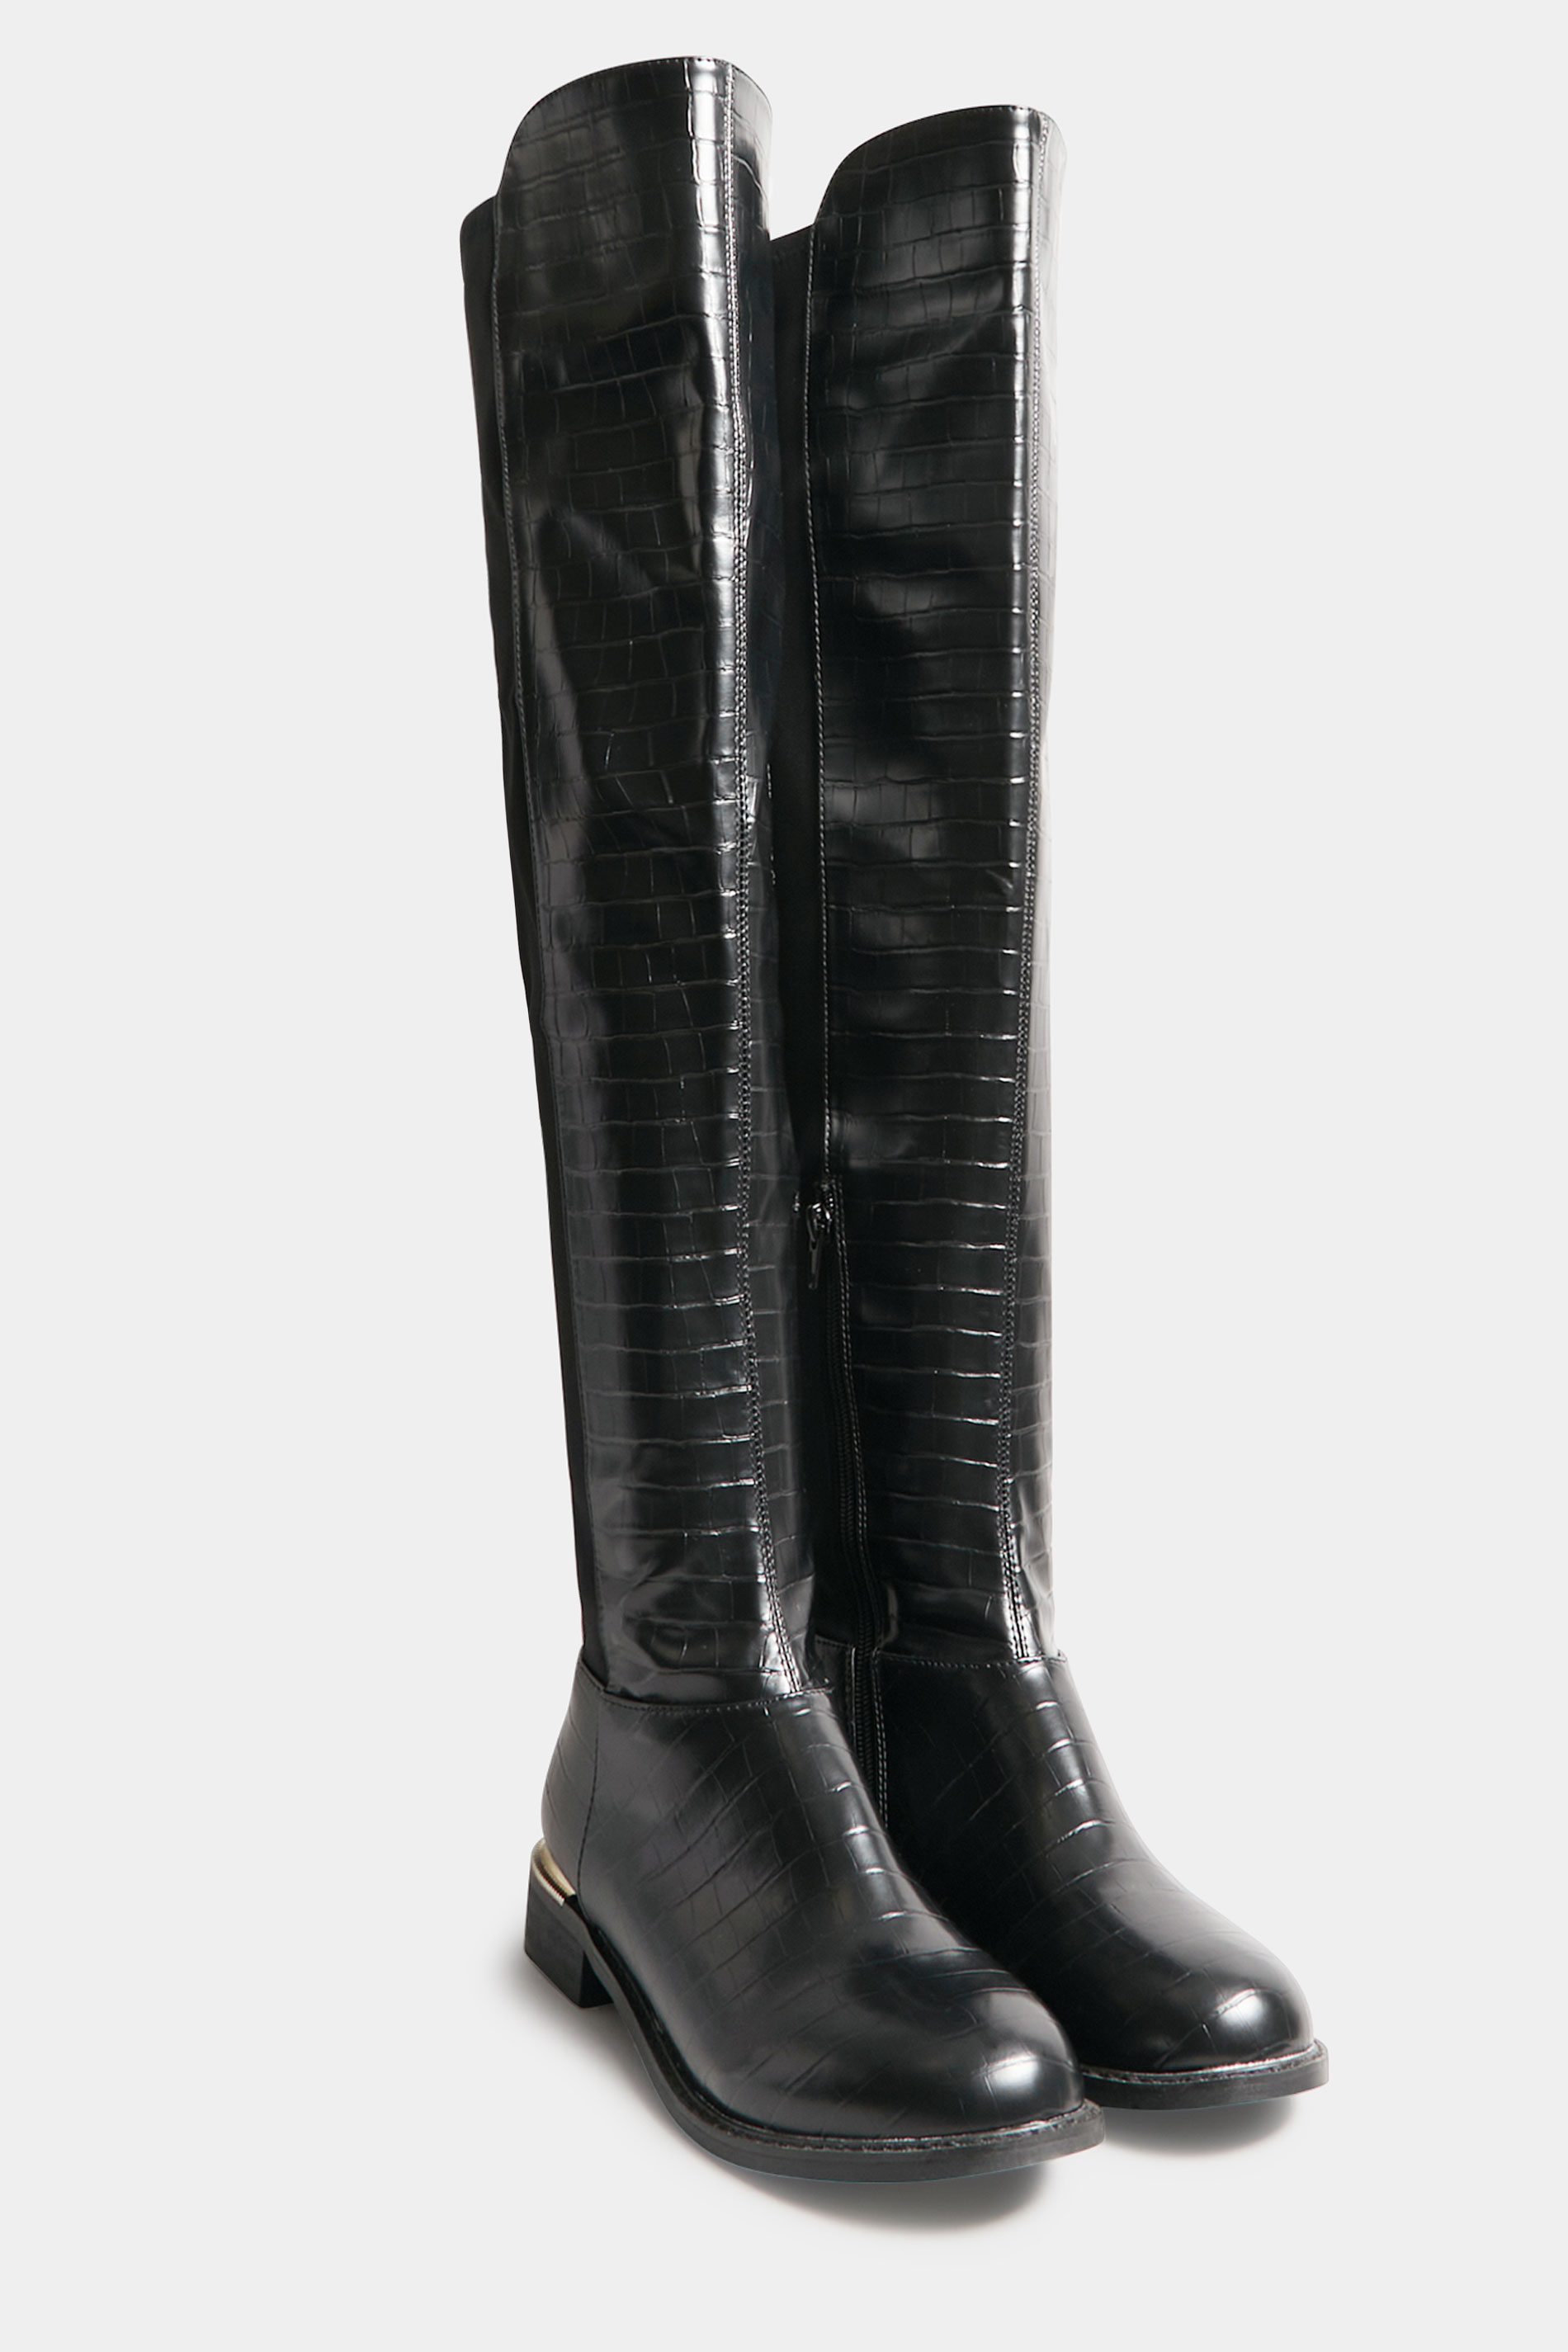 LTS Tall Black Knee High 50/50 Faux Leather Croc Boots In Standard Fit | Long Tall Sally 2